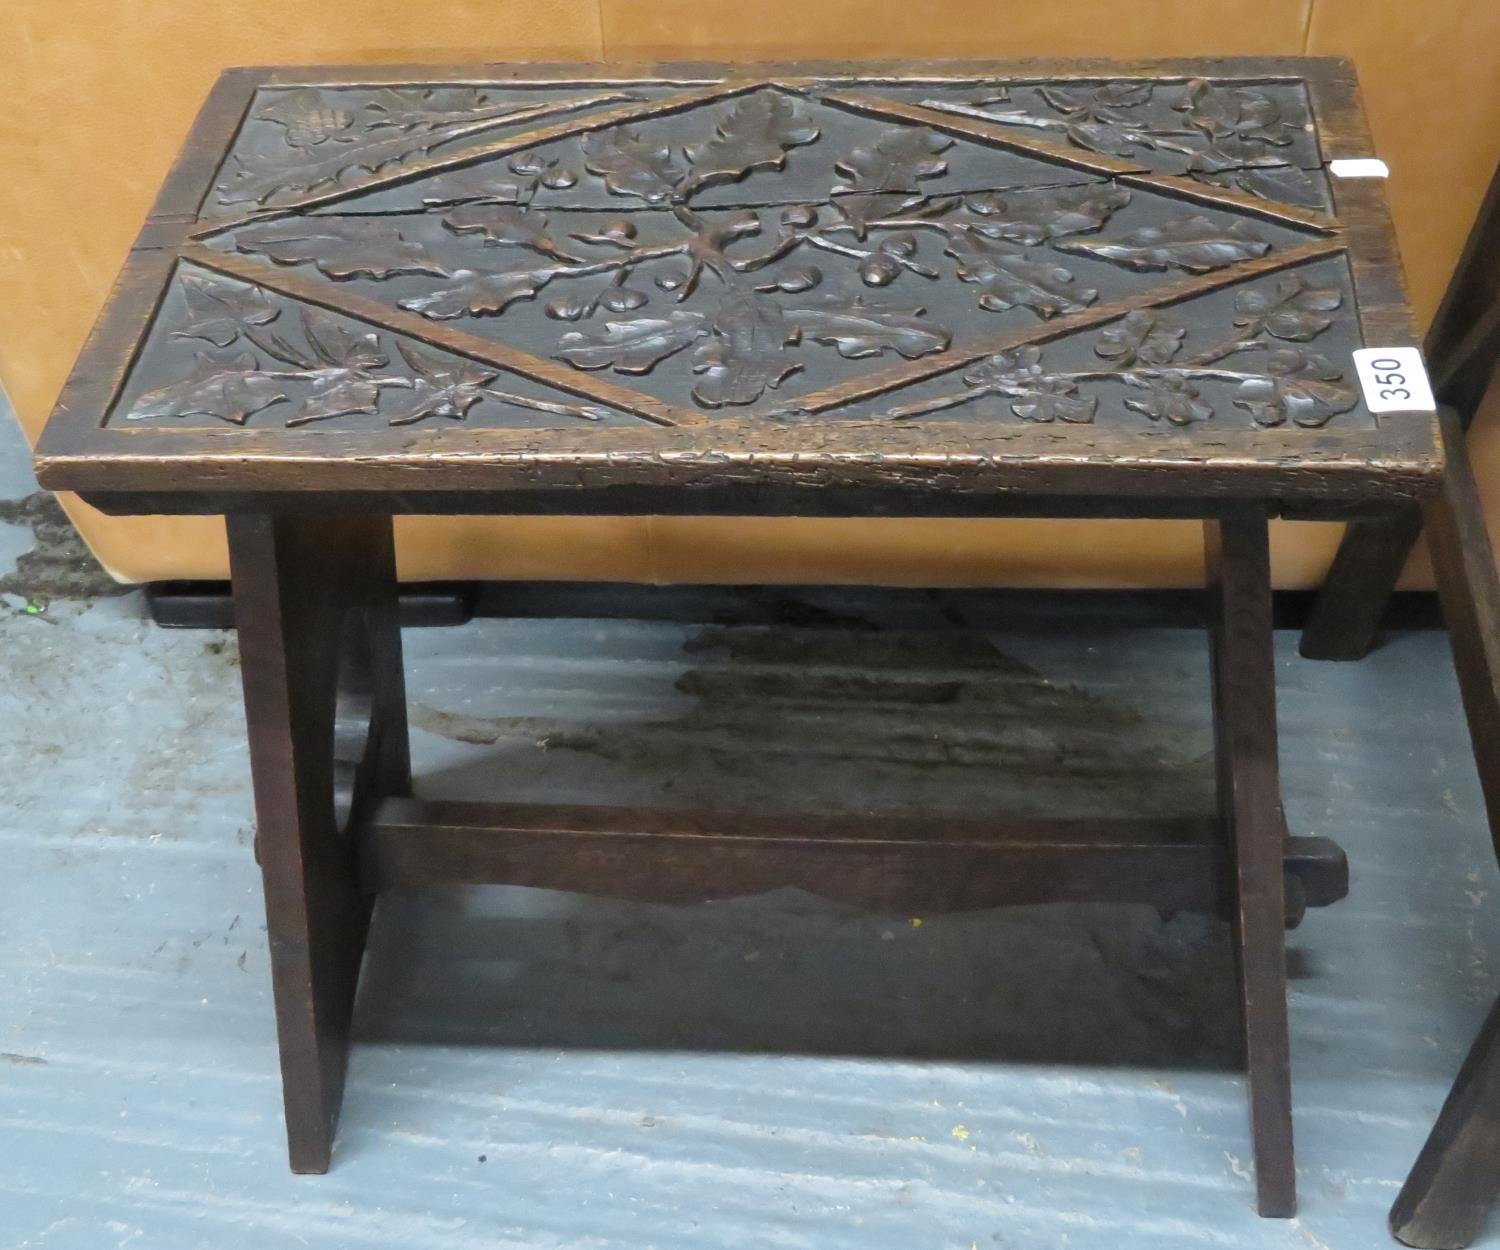 Beautifully carved bench top older than base